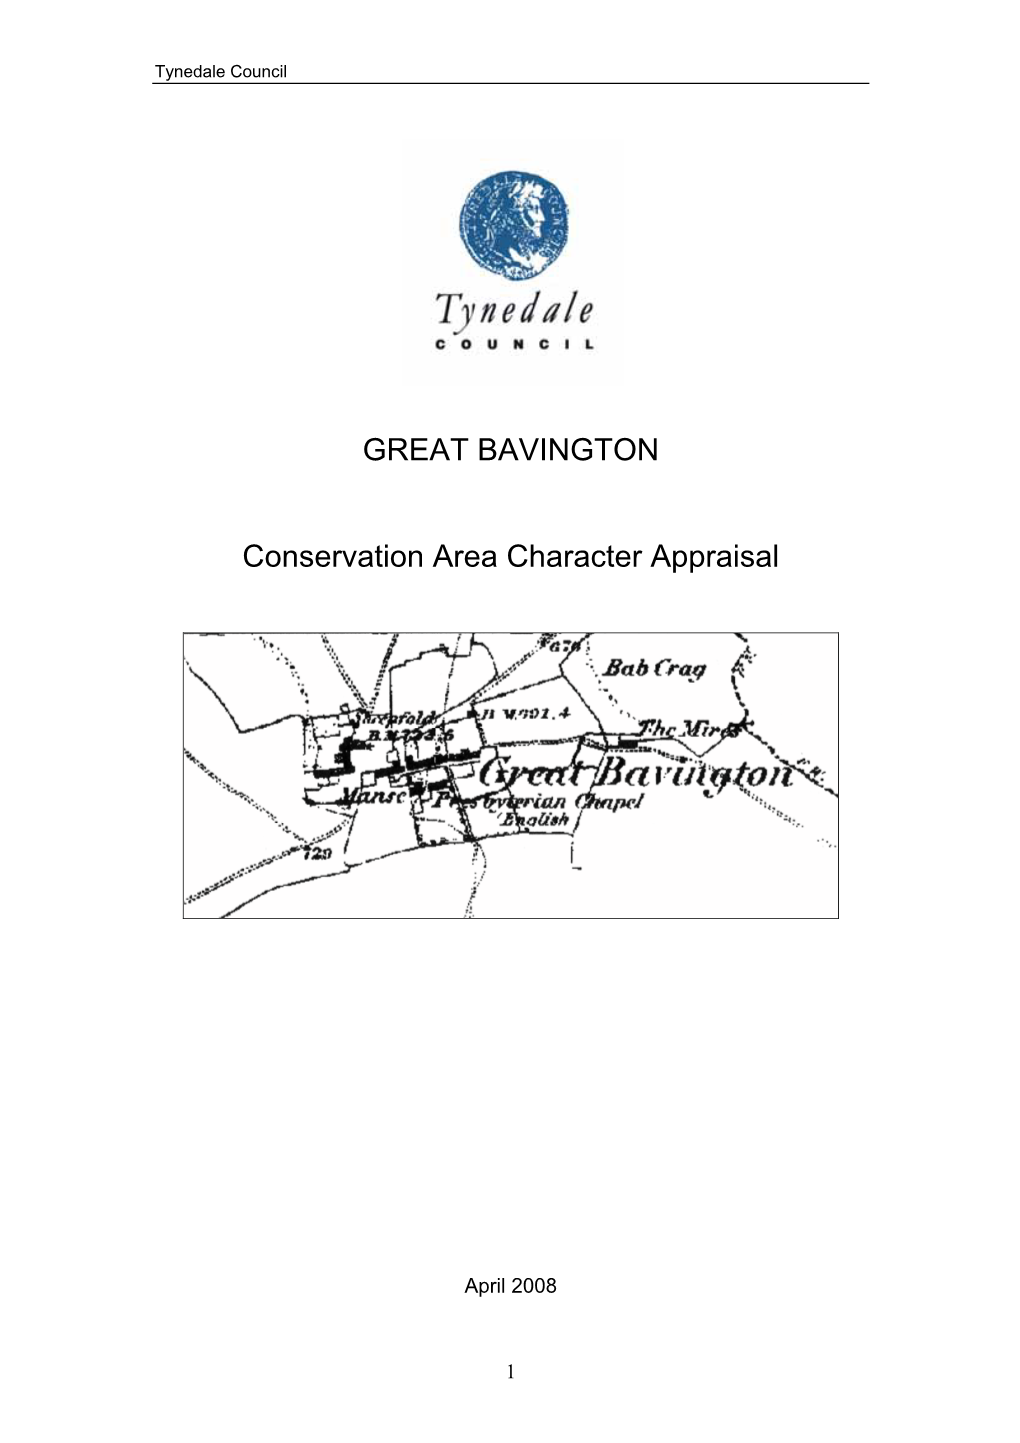 Great Bavington Conservation Area That Describes the General Character of the Area, and by Defining What Is of Special Historic Importance